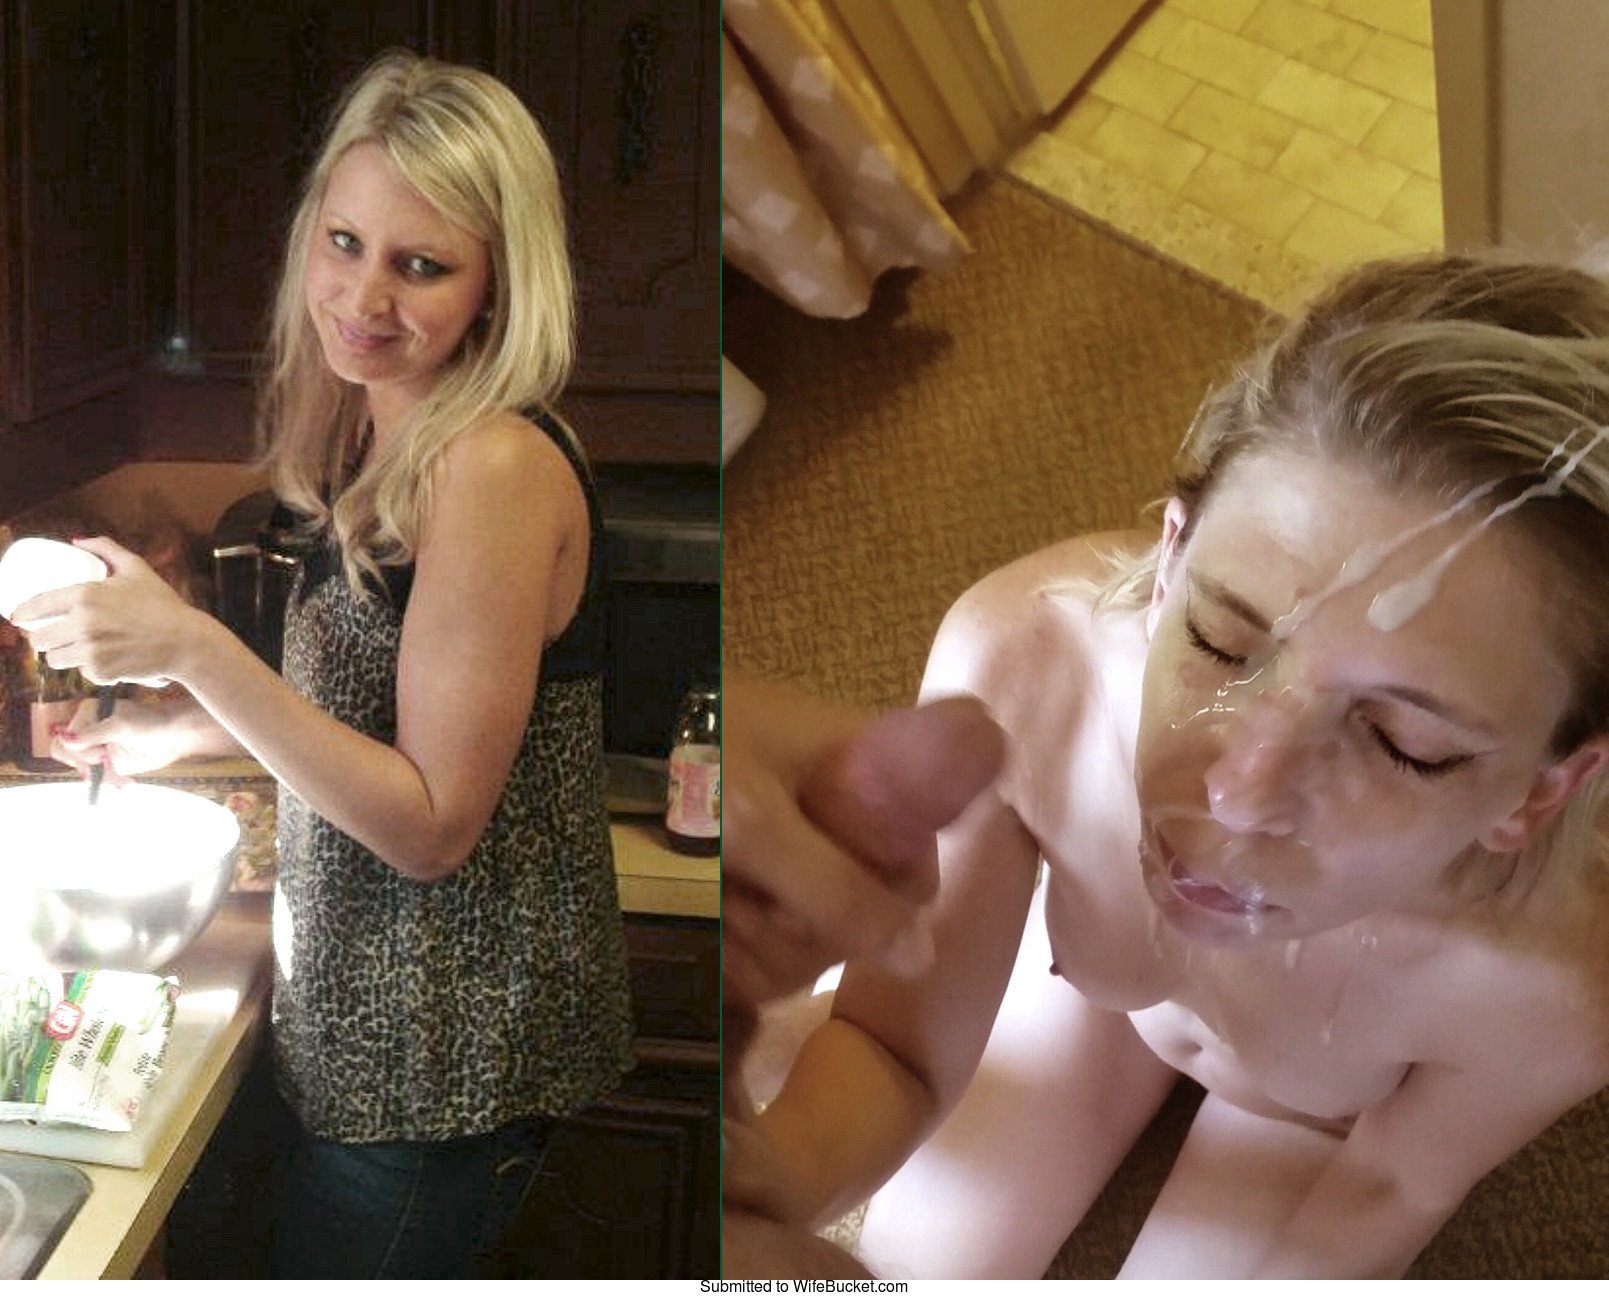 Before After Blowjob Tumblr - before-after pics â€“ WifeBucket | Offical MILF Blog